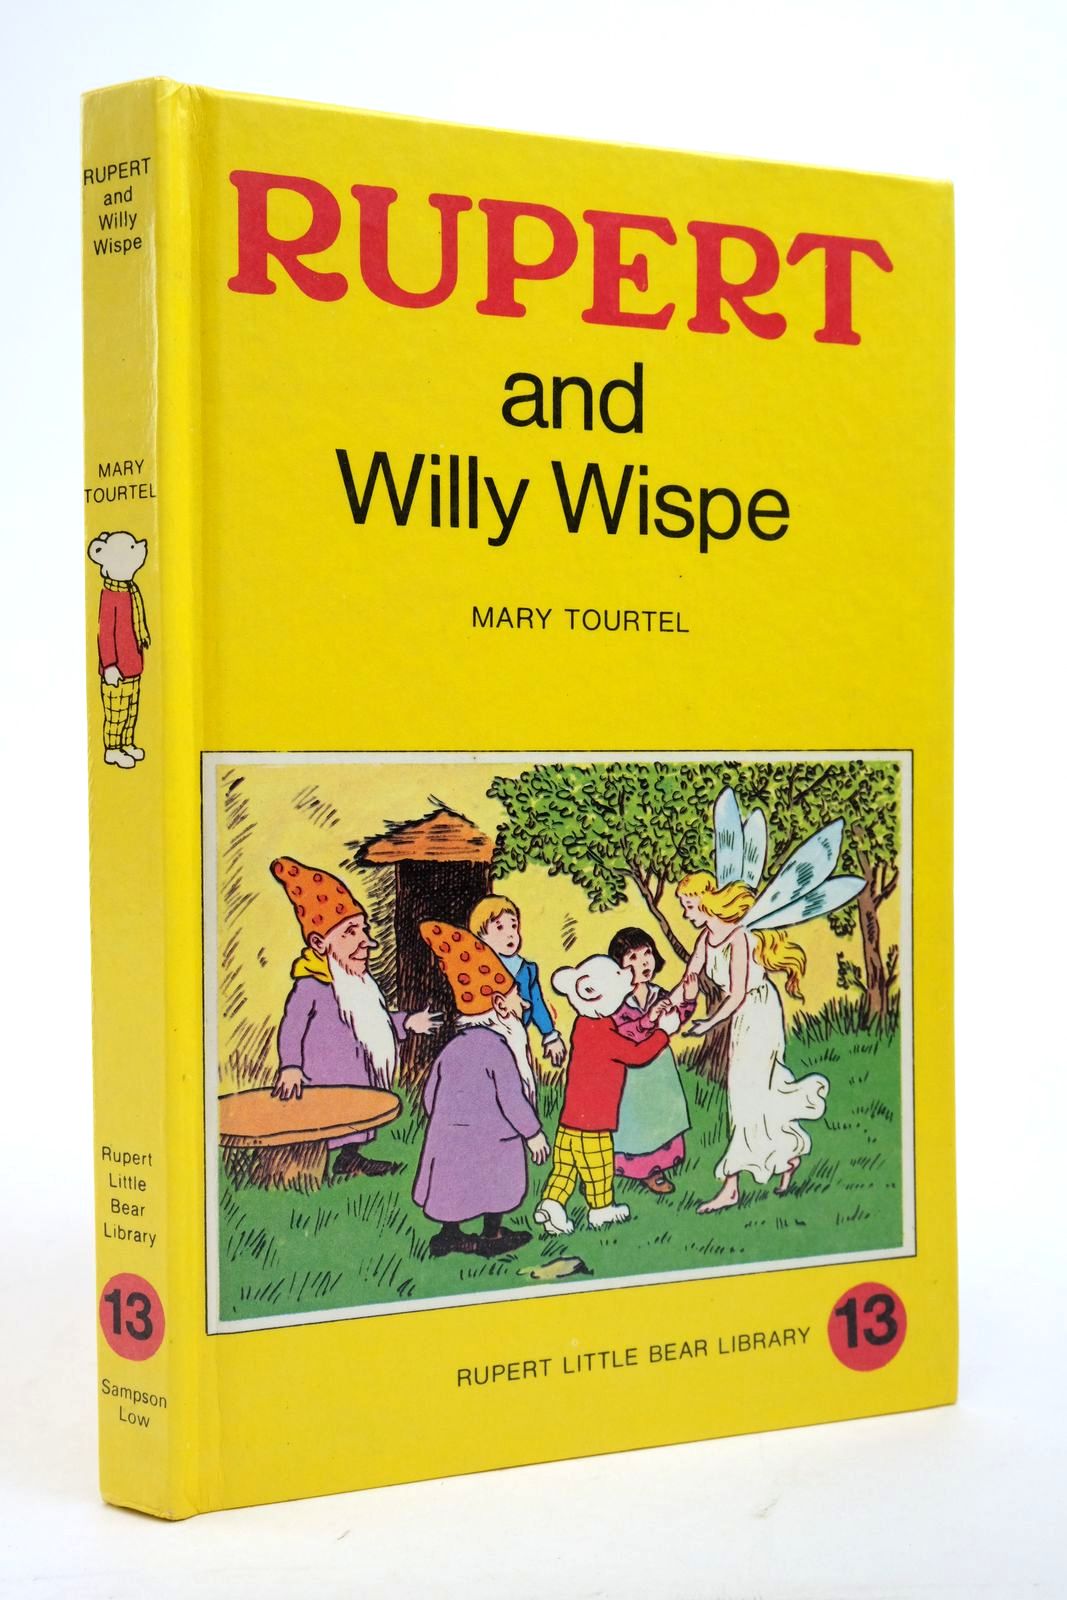 Photo of RUPERT AND WILLY WISPE - RUPERT LITTLE BEAR LIBRARY No. 13 (WOOLWORTH) written by Tourtel, Mary illustrated by Tourtel, Mary published by Sampson Low, Marston & Co. Ltd. (STOCK CODE: 2136965)  for sale by Stella & Rose's Books